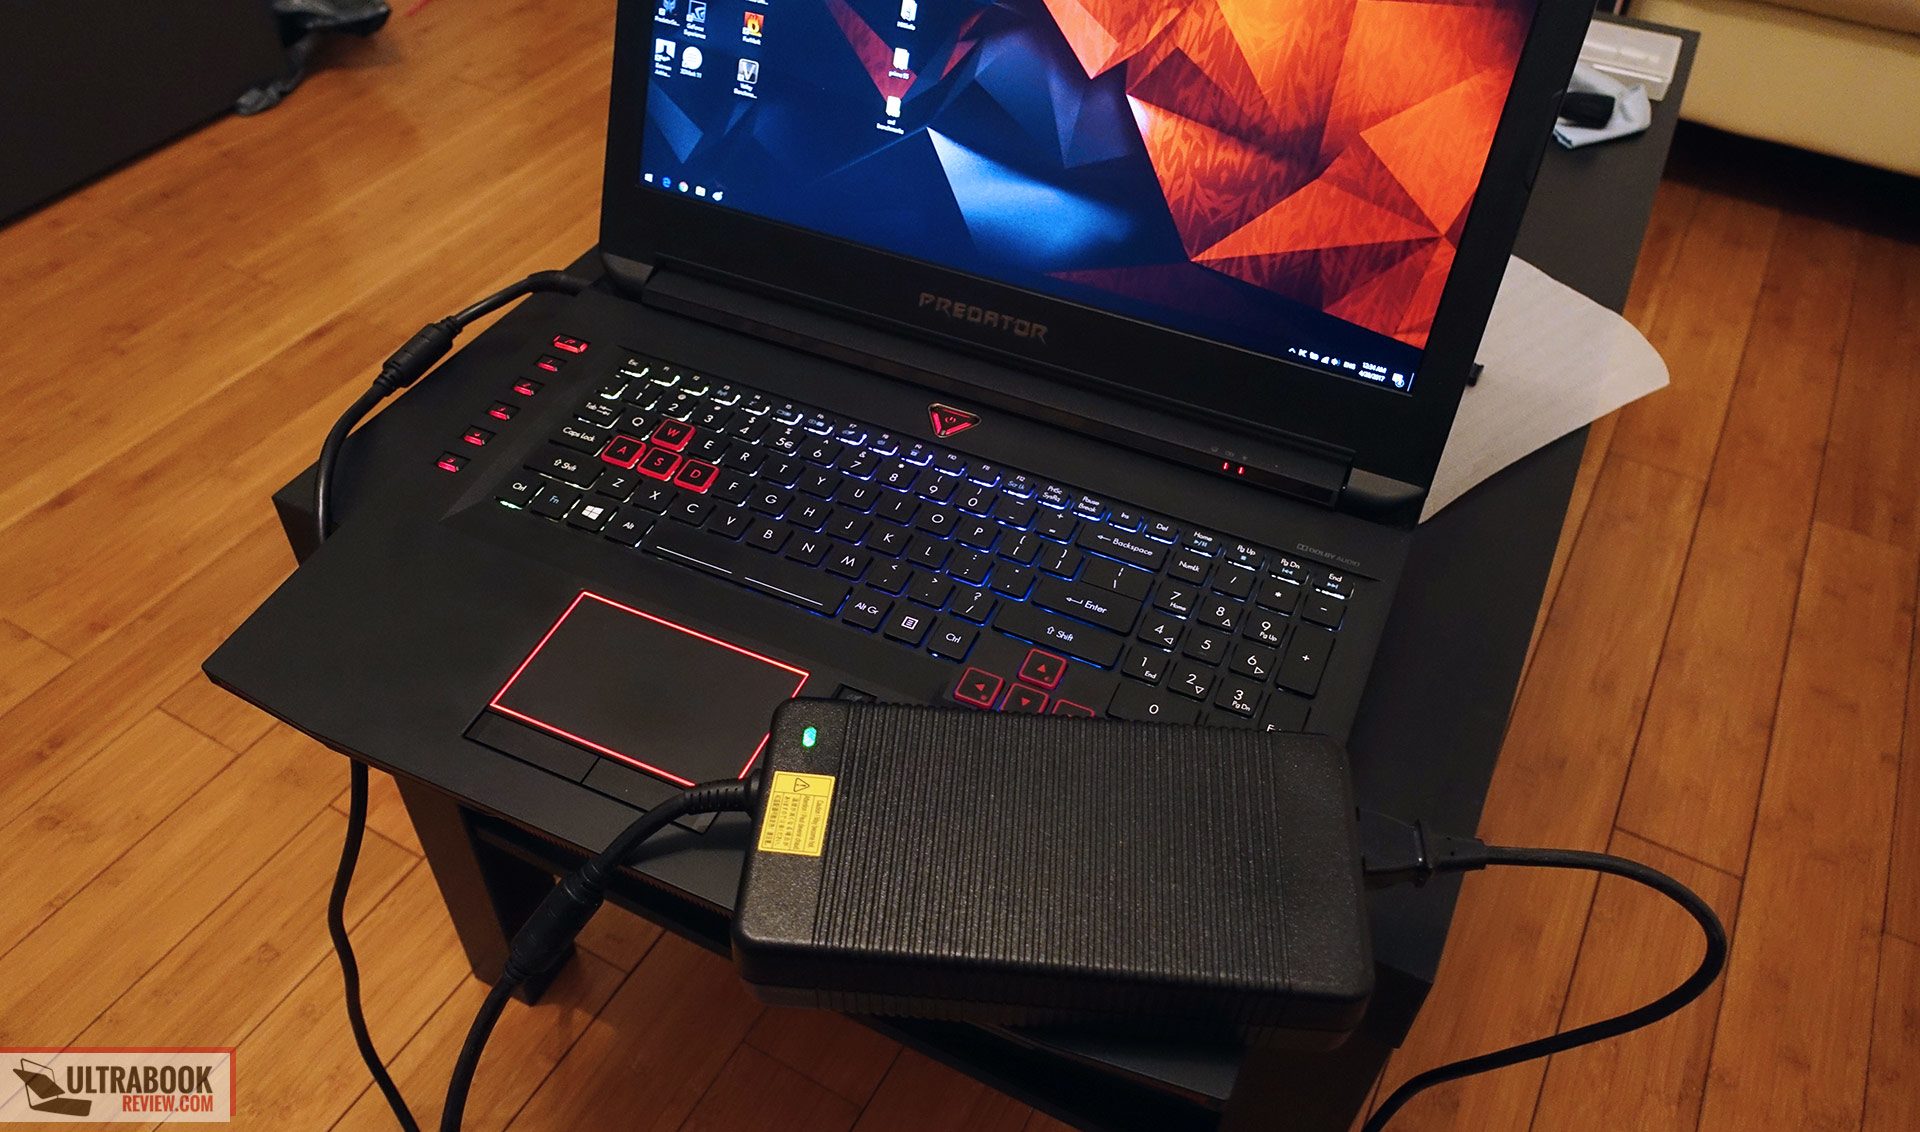 Acer Predator 17X review: This gaming laptop packs attitude and